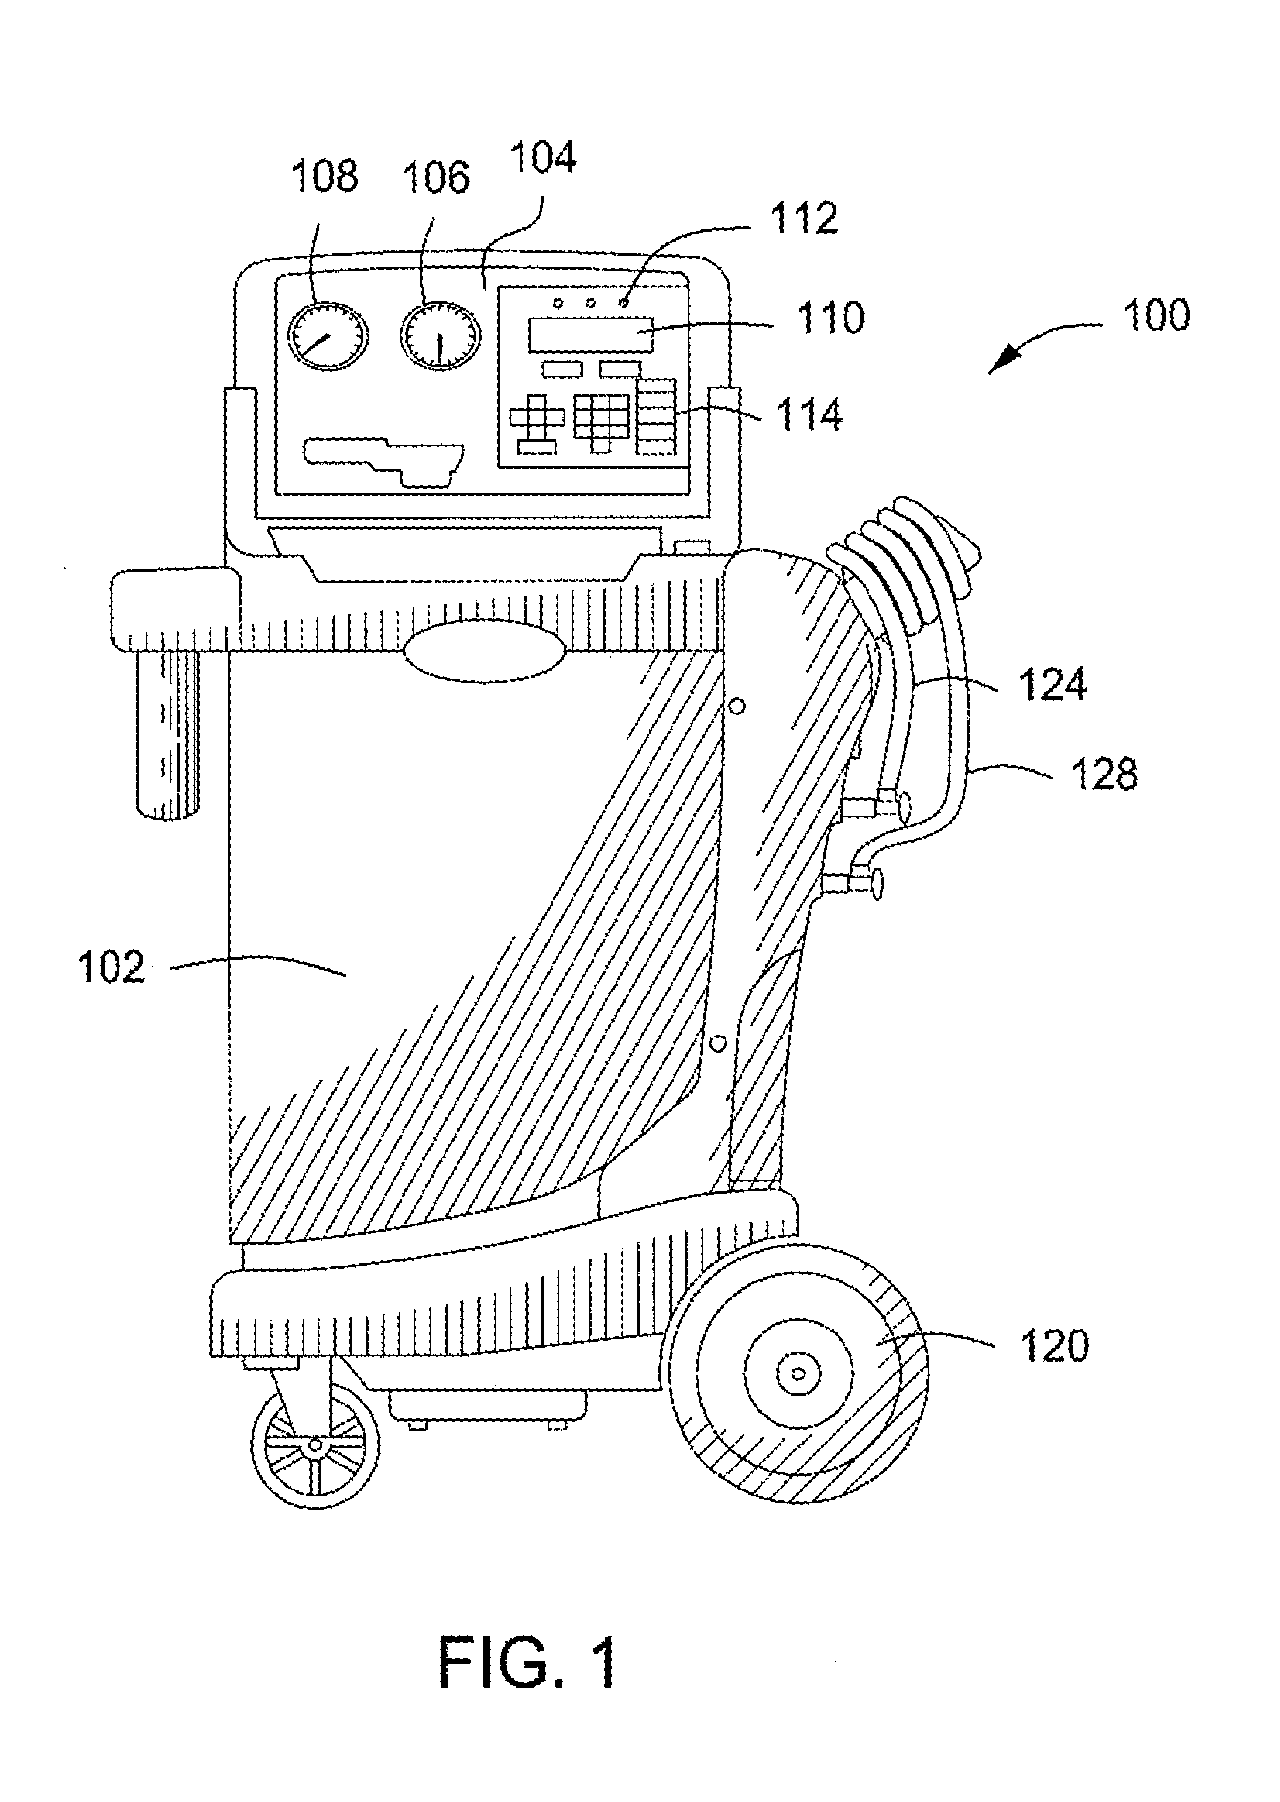 Apparatus and Method for Identifying and Operating Air Purge in Safe Mode and Having a Dip Tube